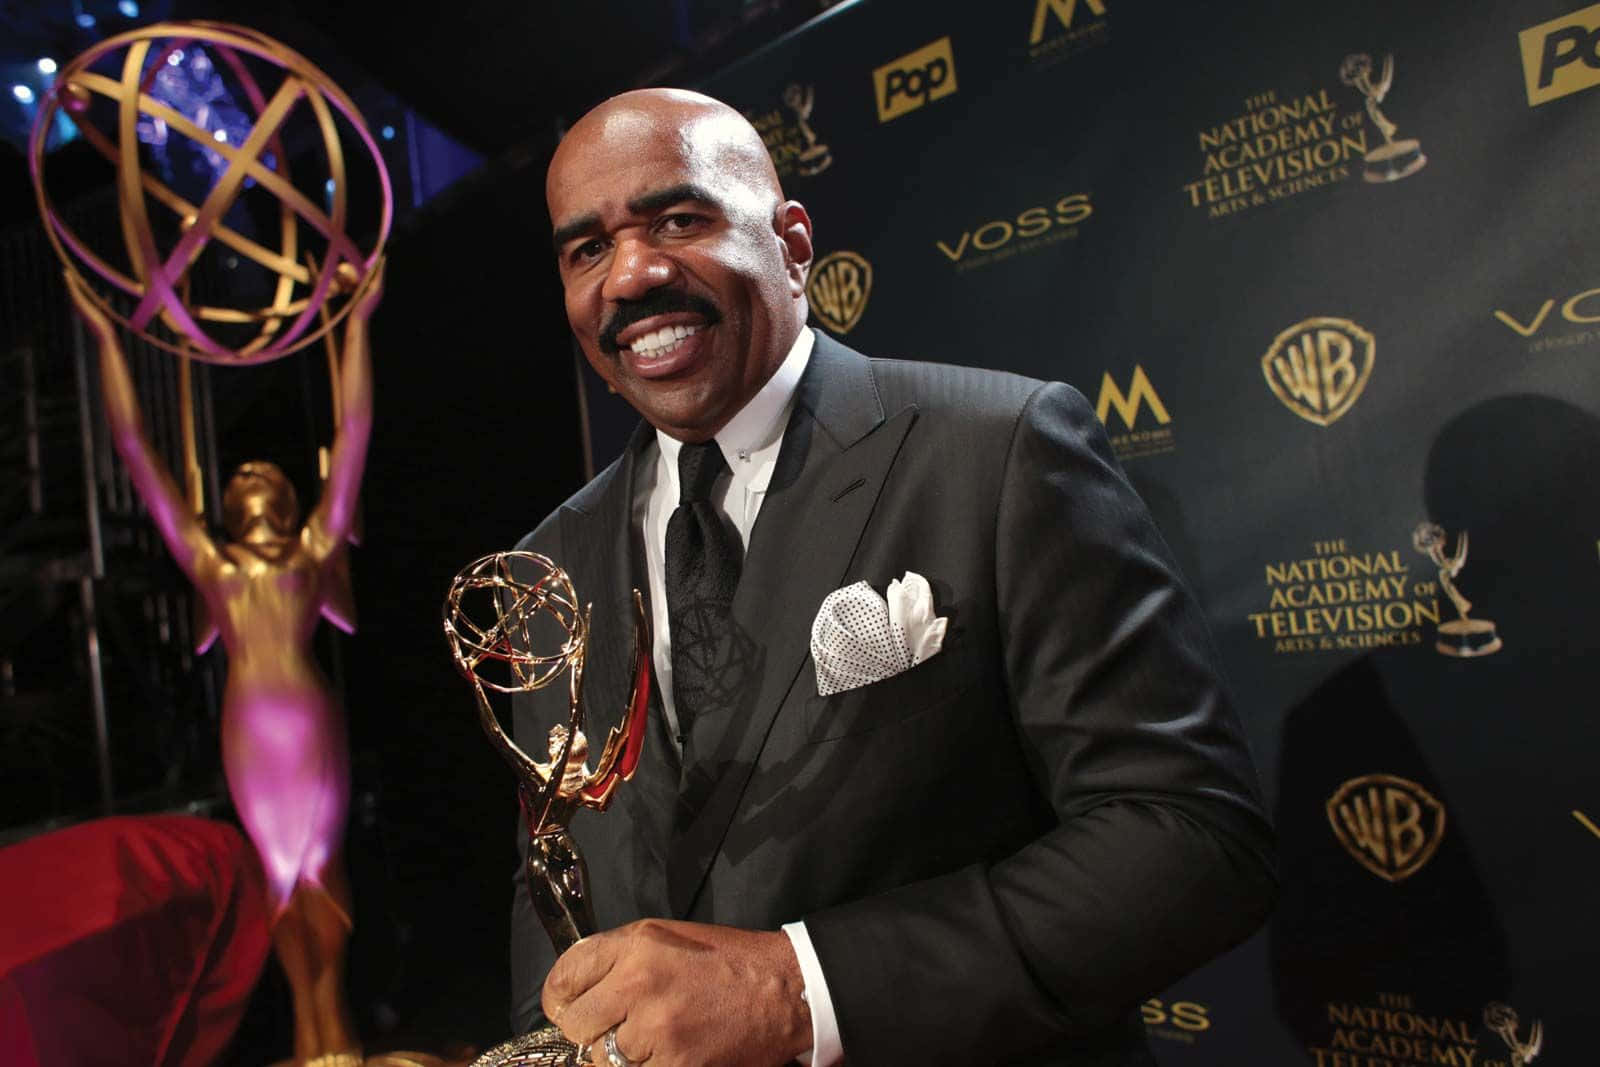 Renowned Tv Personality, Steve Harvey, Proudly Holding His Achievement Award Background